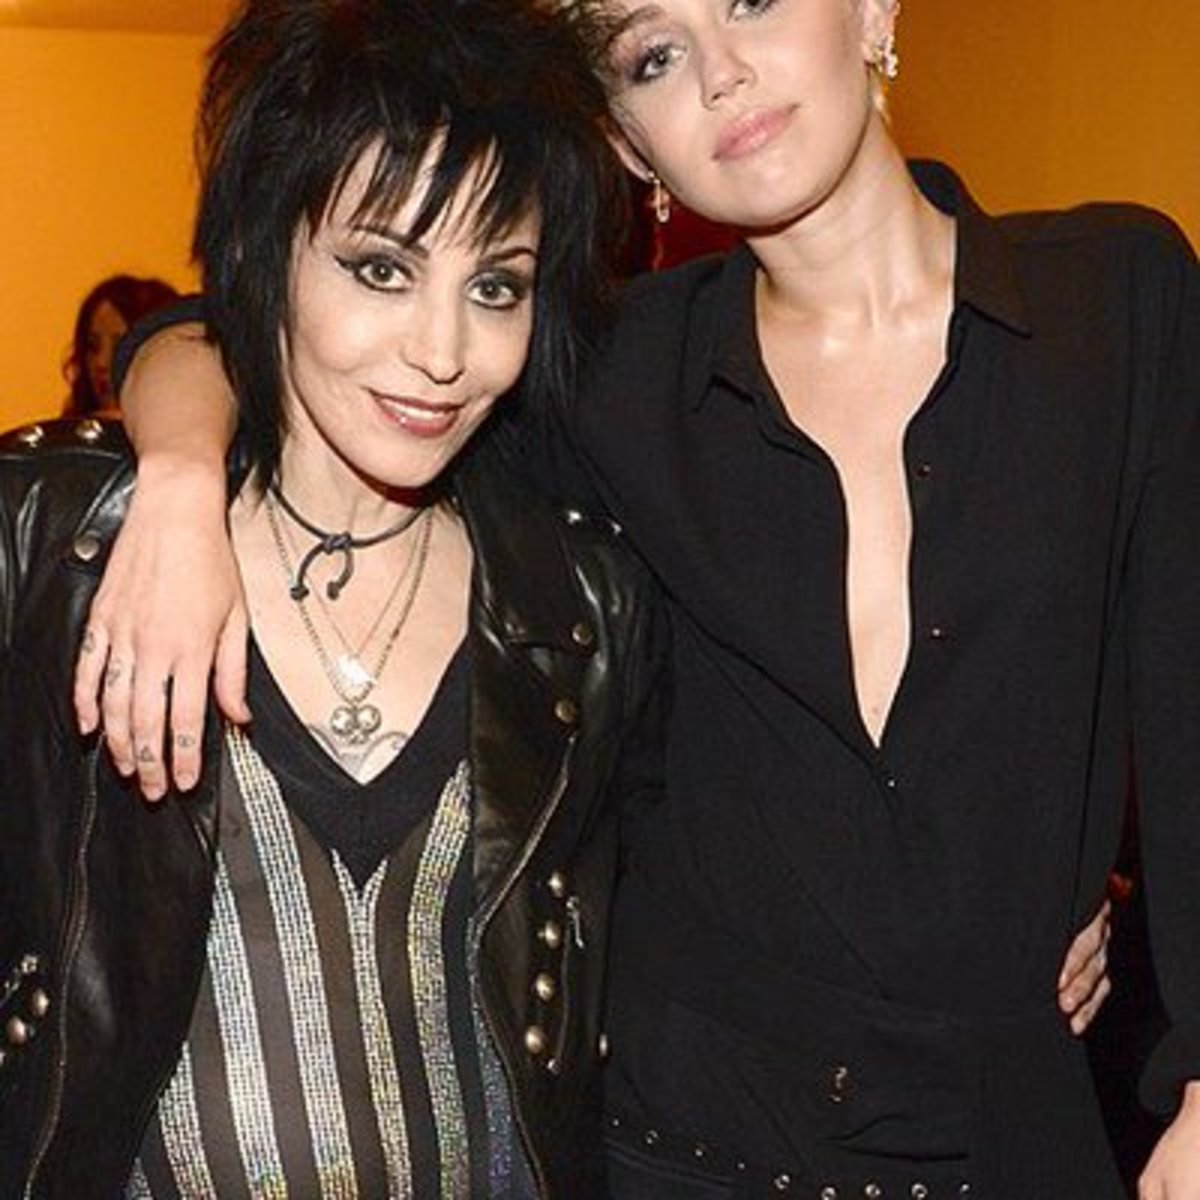 Miley and Joan